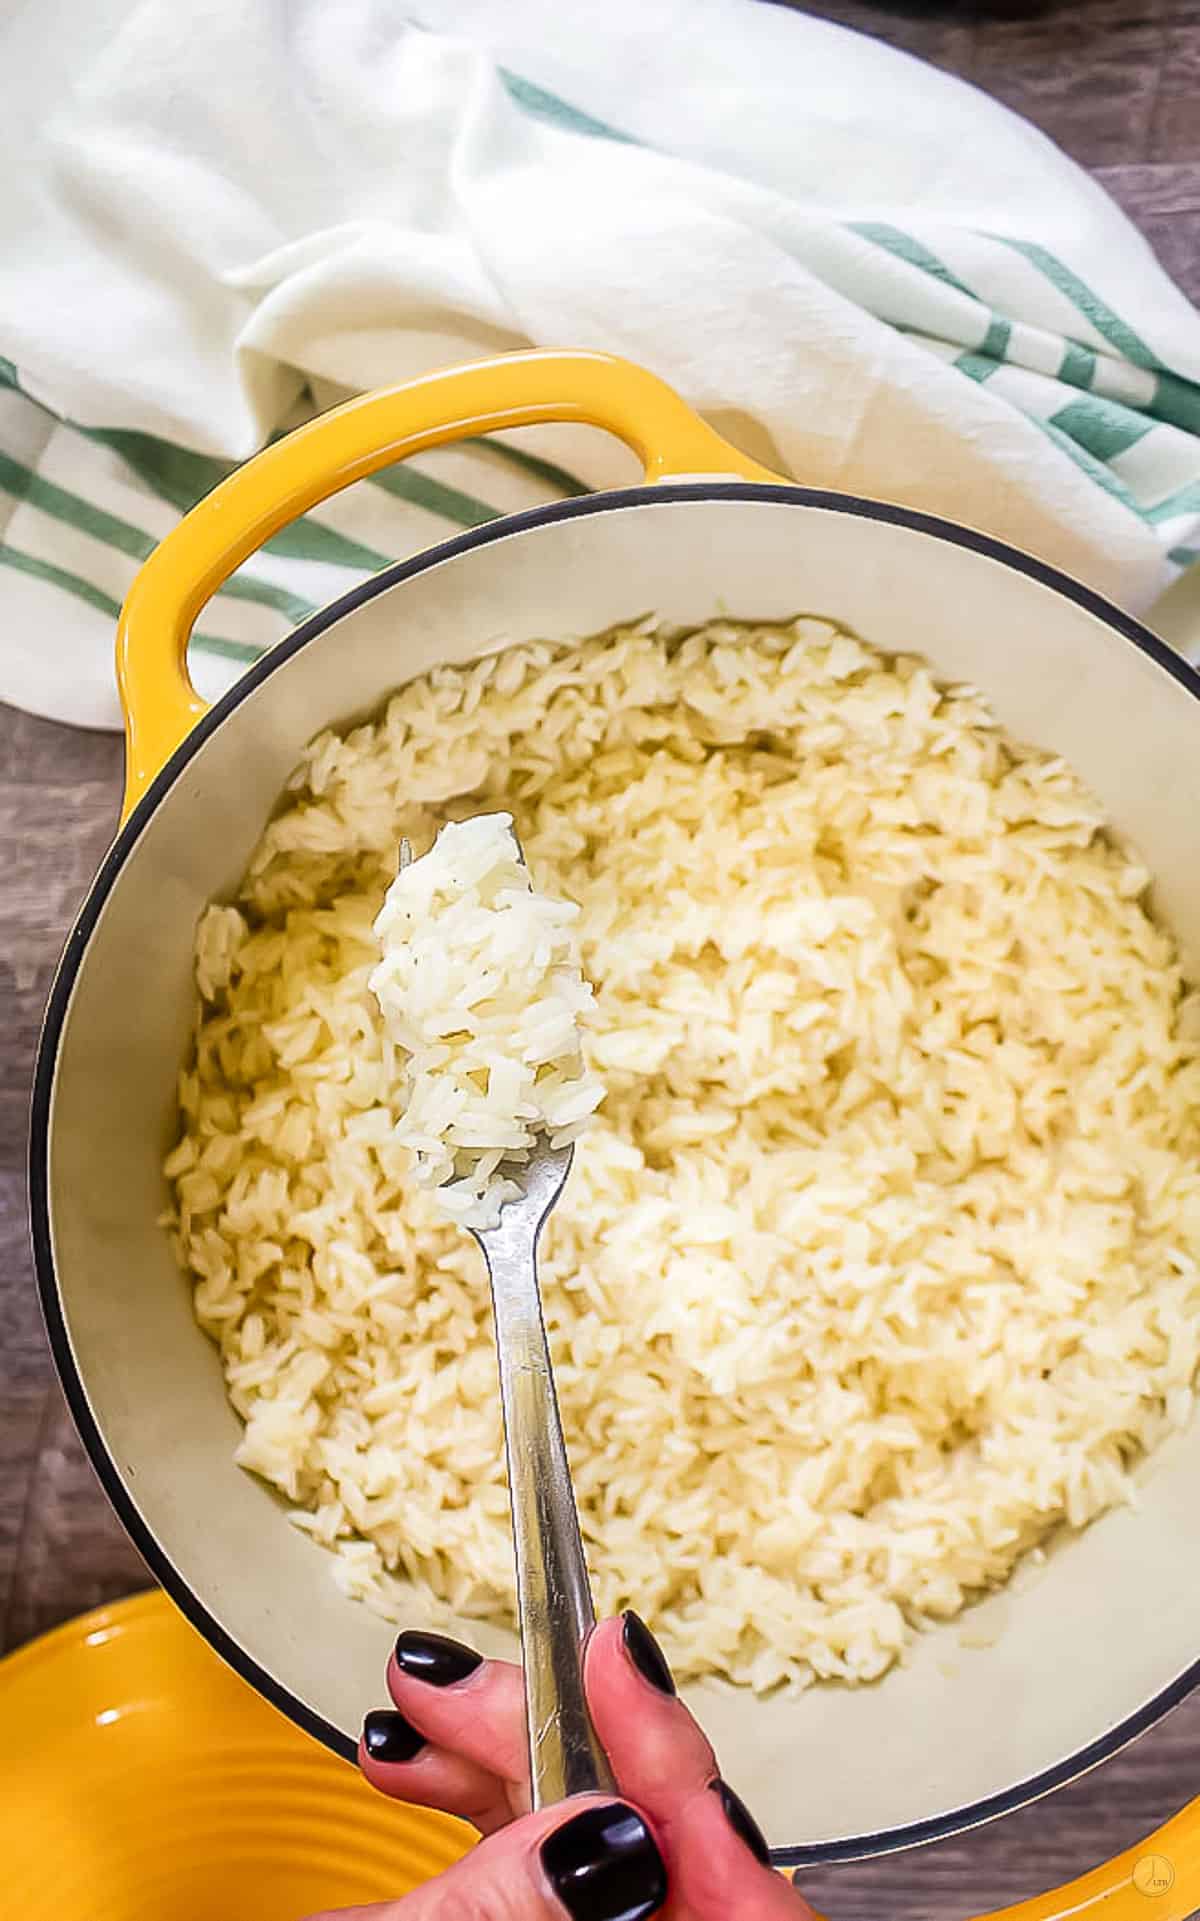 baked rice is the best option as a side dish for meatballs